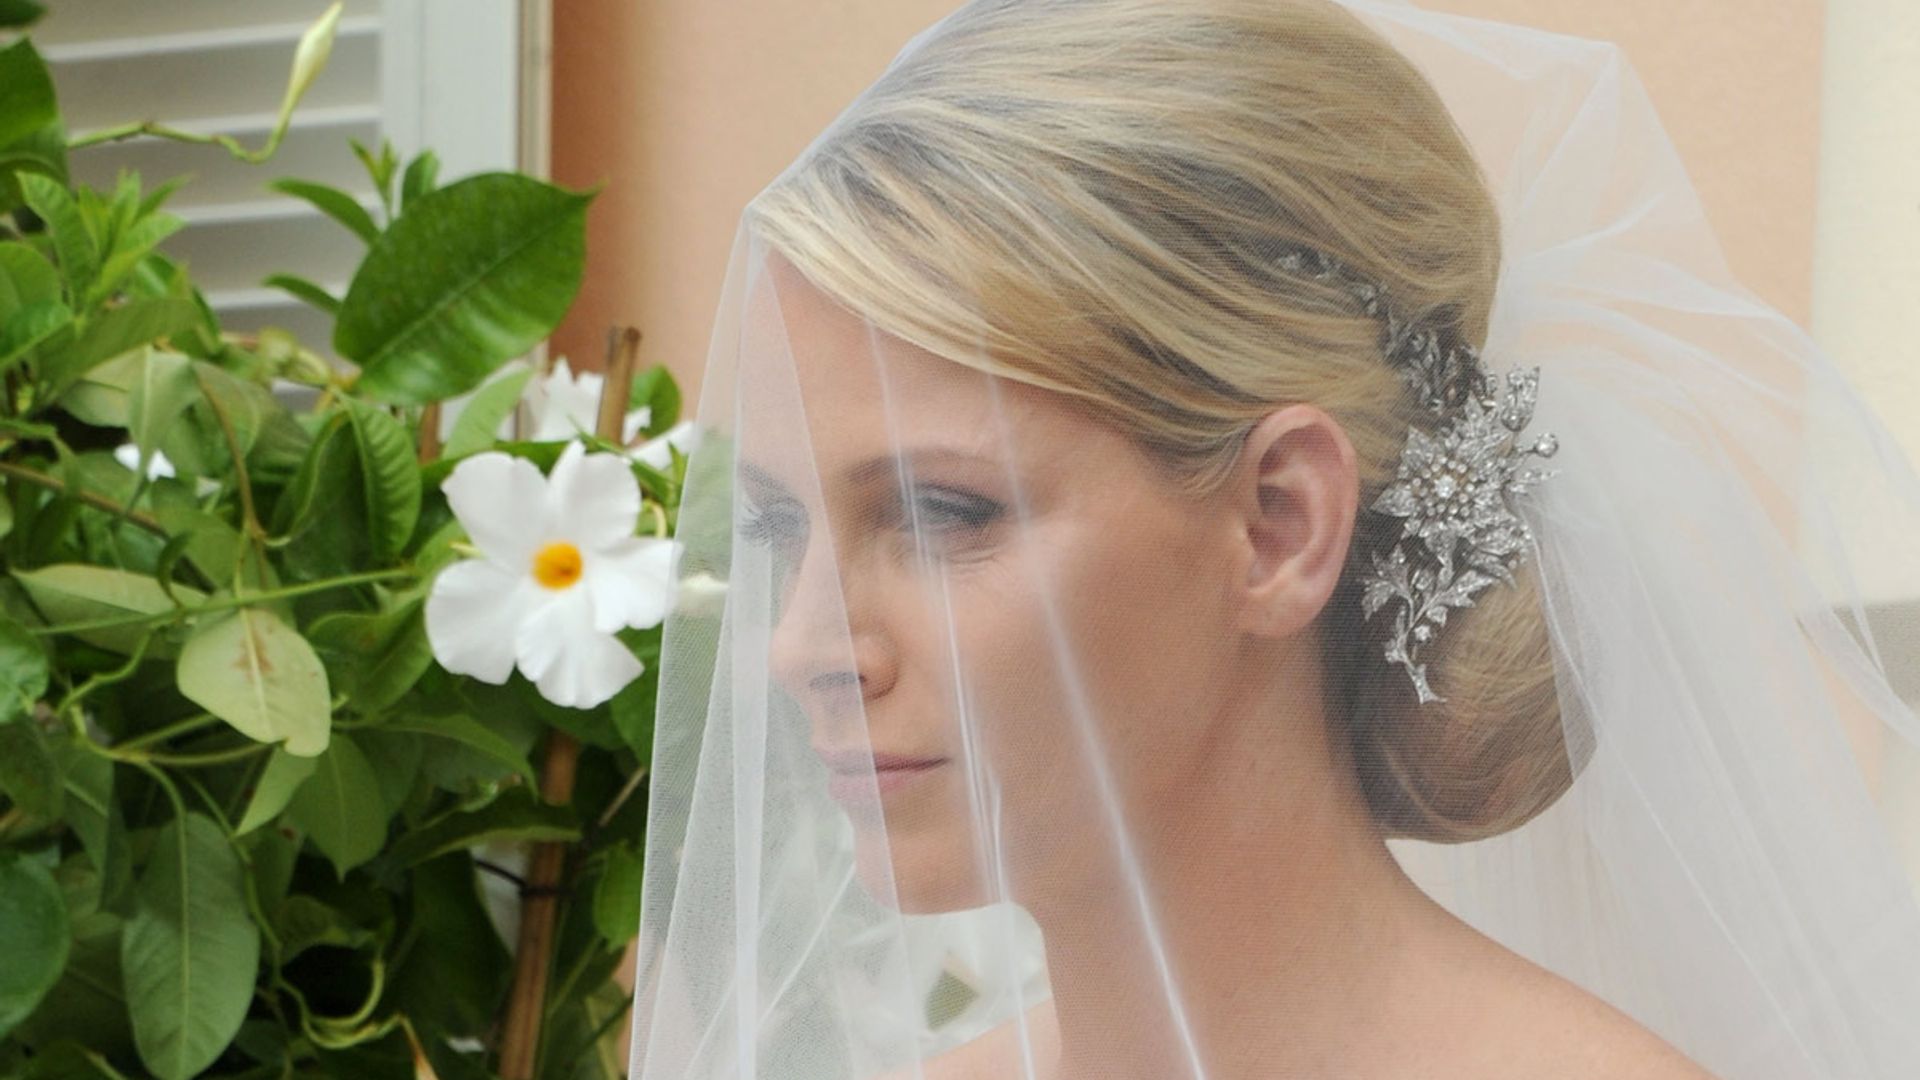 Tearful Princess Charlene 'overwhelmed' on wedding day with Prince Albert - details